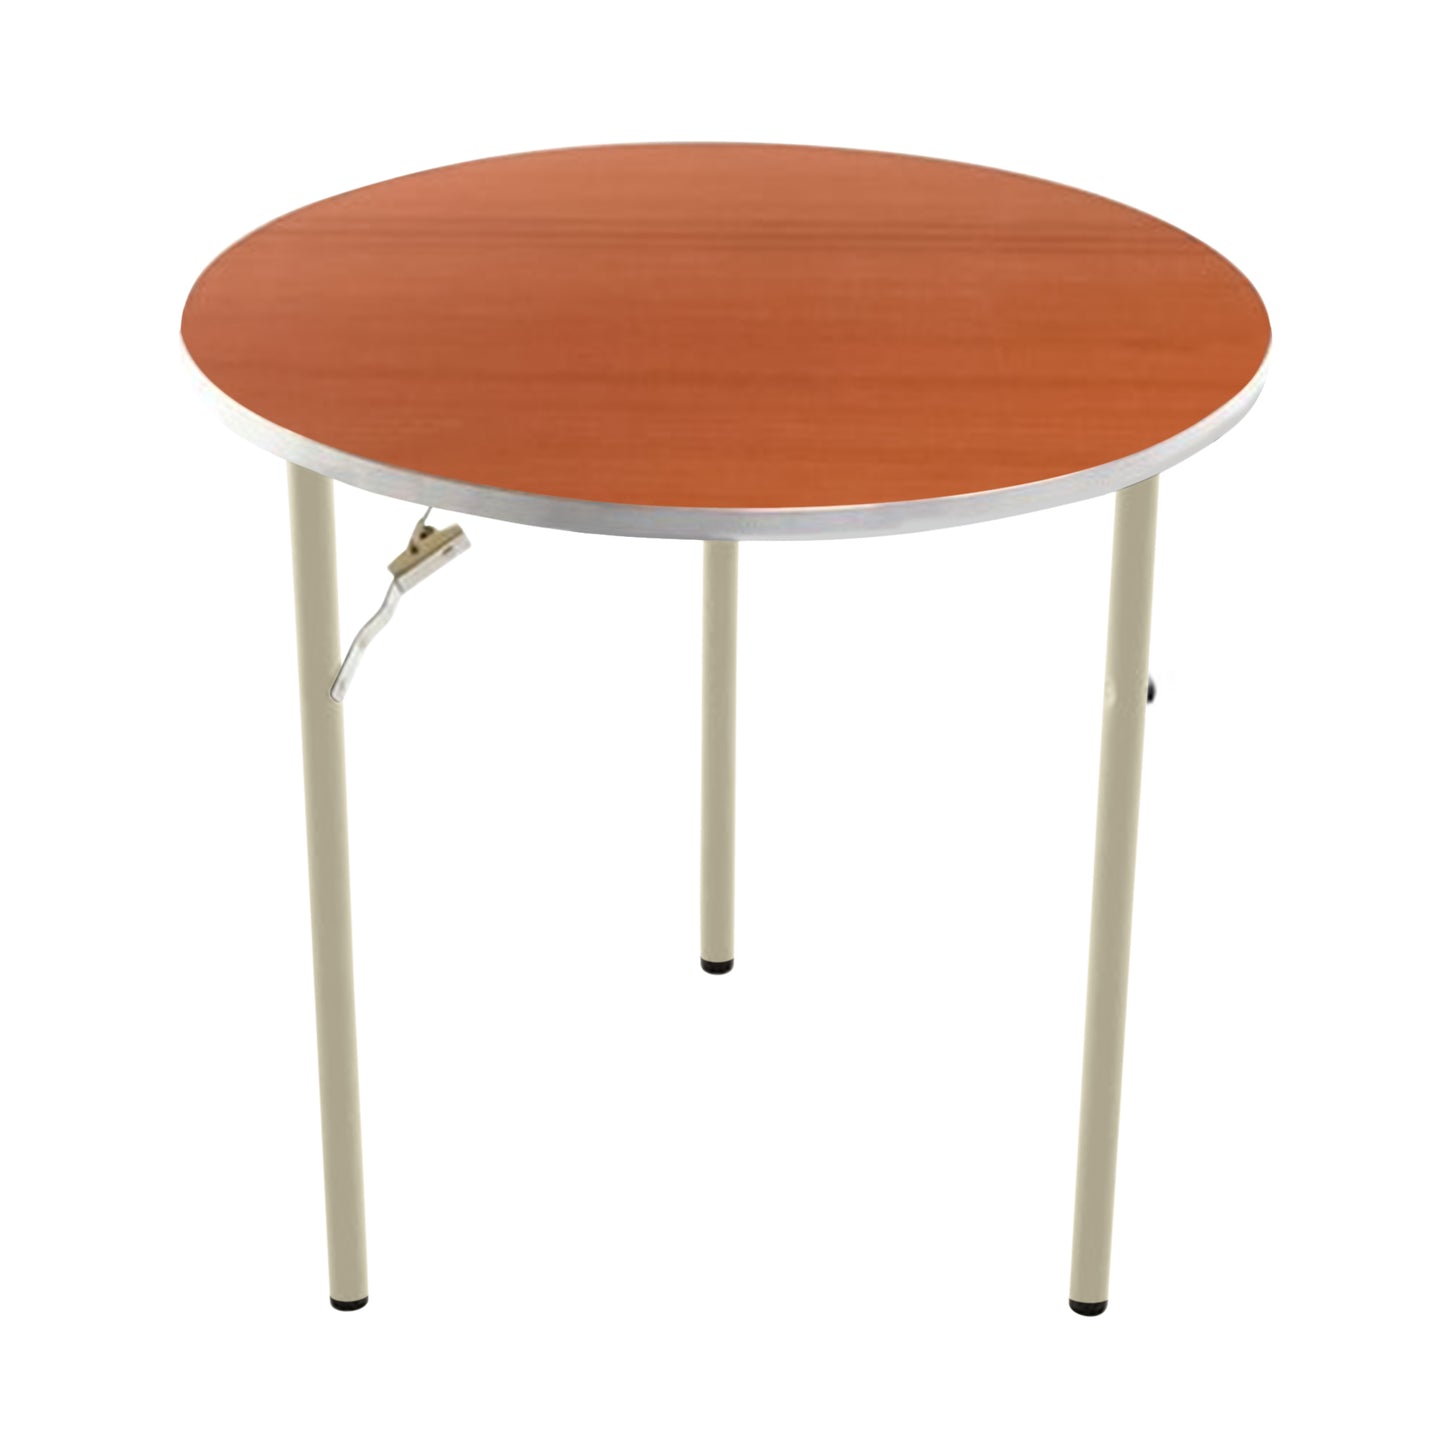 AmTab Folding Table - Plywood Stained and Sealed - Aluminum Edge - Round - 54" Diameter x 29"H  (AmTab AMT-R54PA)